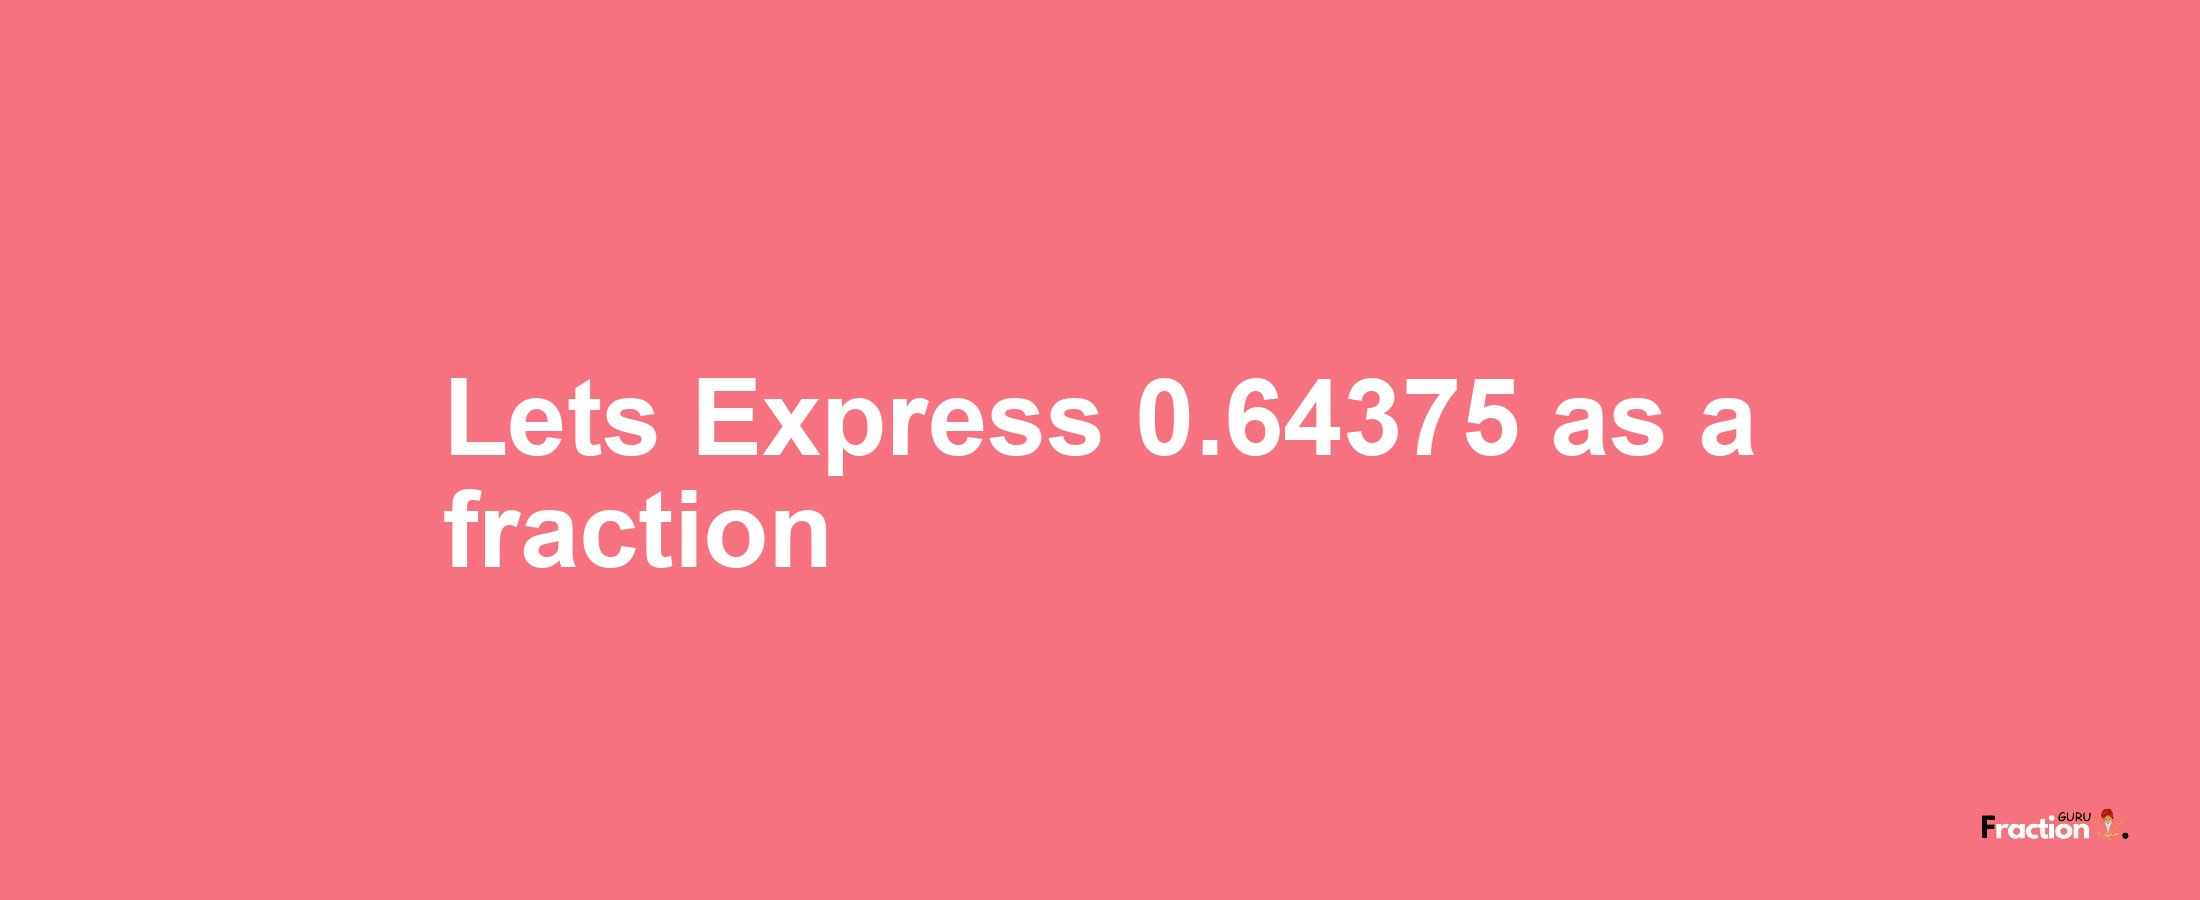 Lets Express 0.64375 as afraction